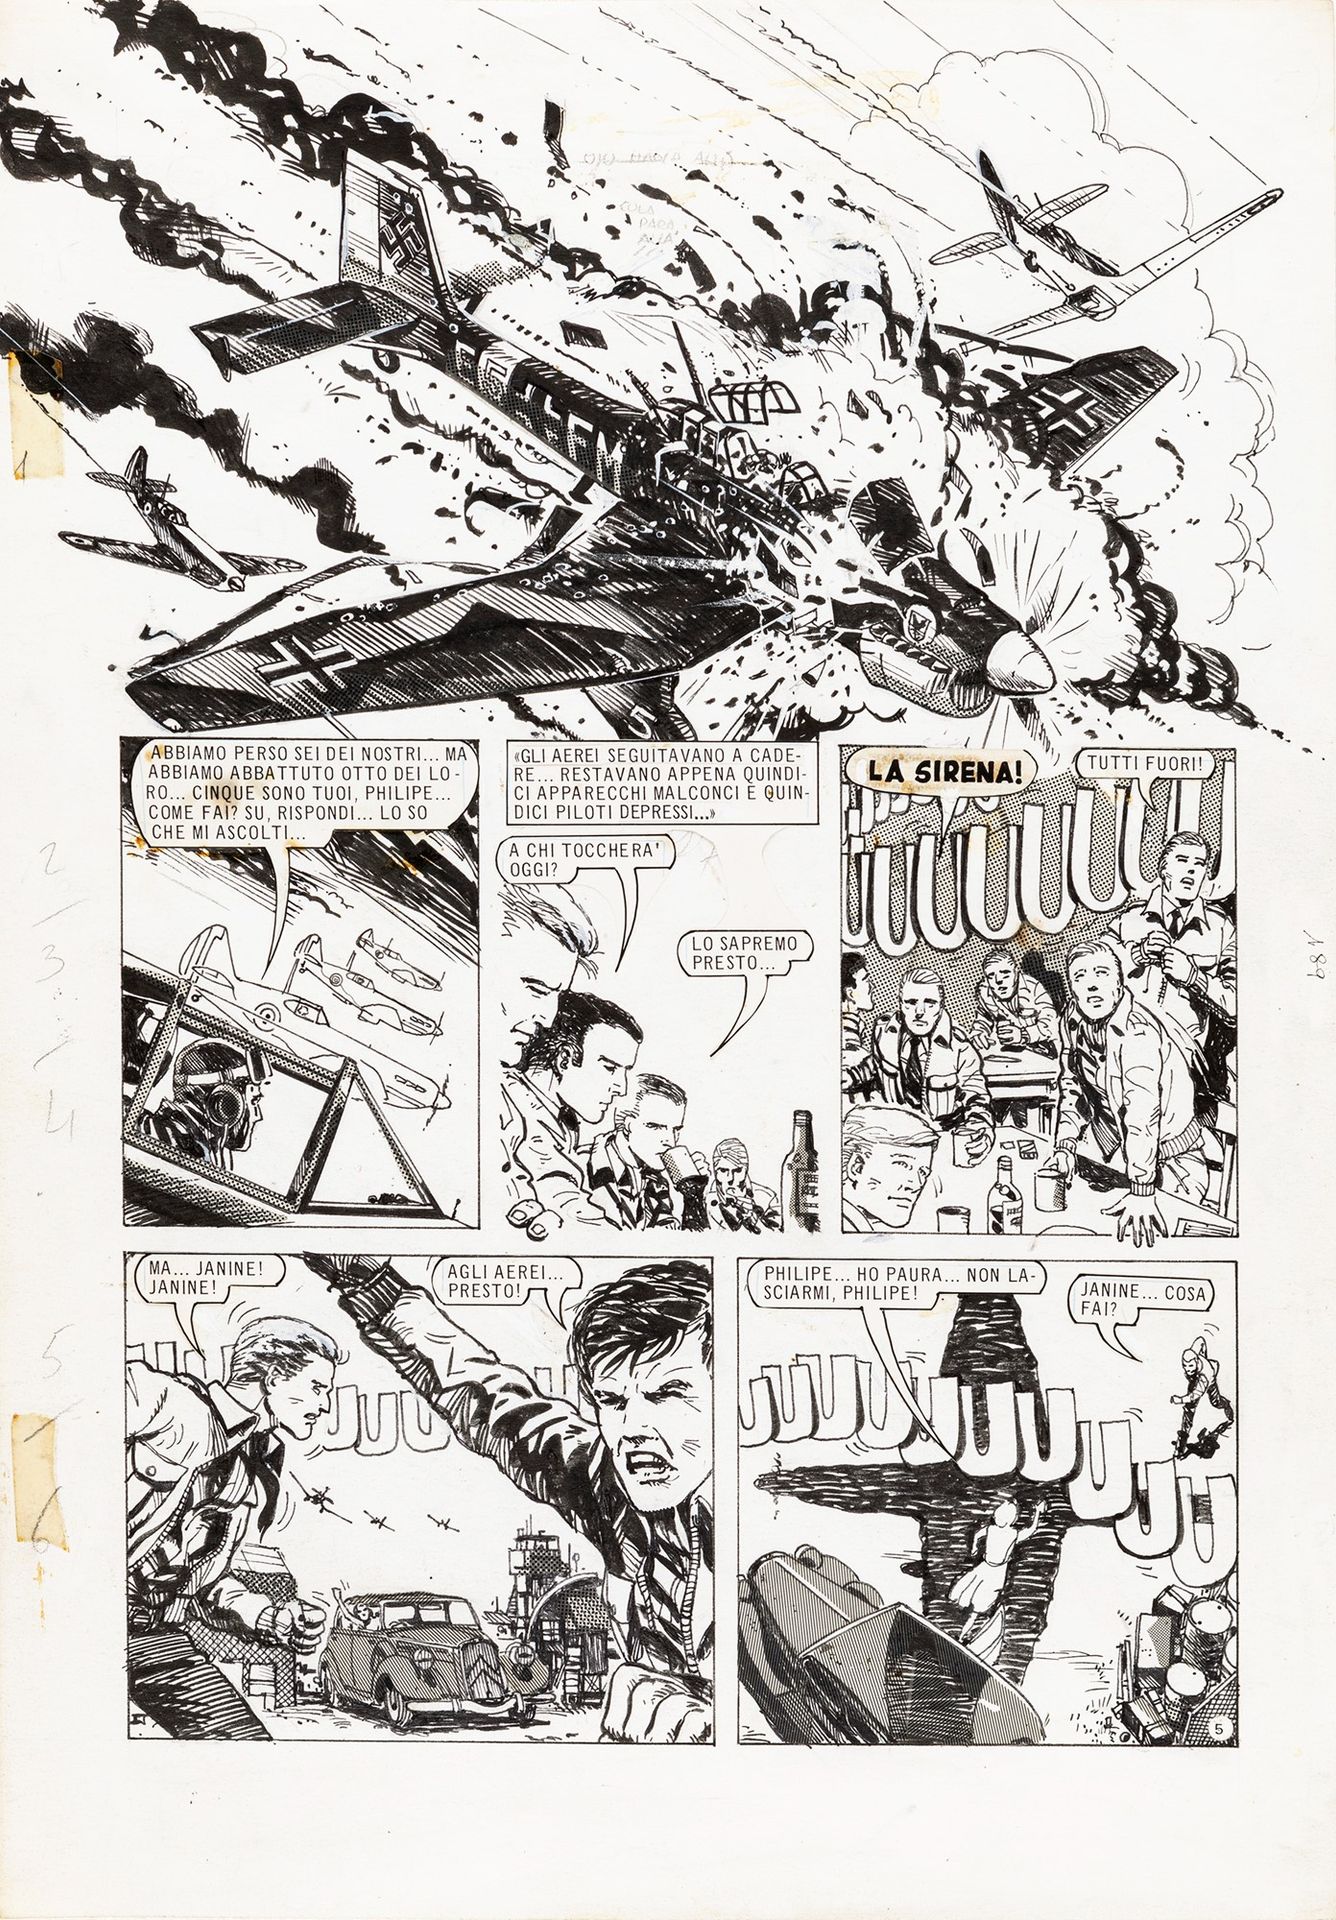 JUAN GIMENEZ Ace of Spades - Mission Accomplished, 1977

pencil, ink and zipaton&hellip;